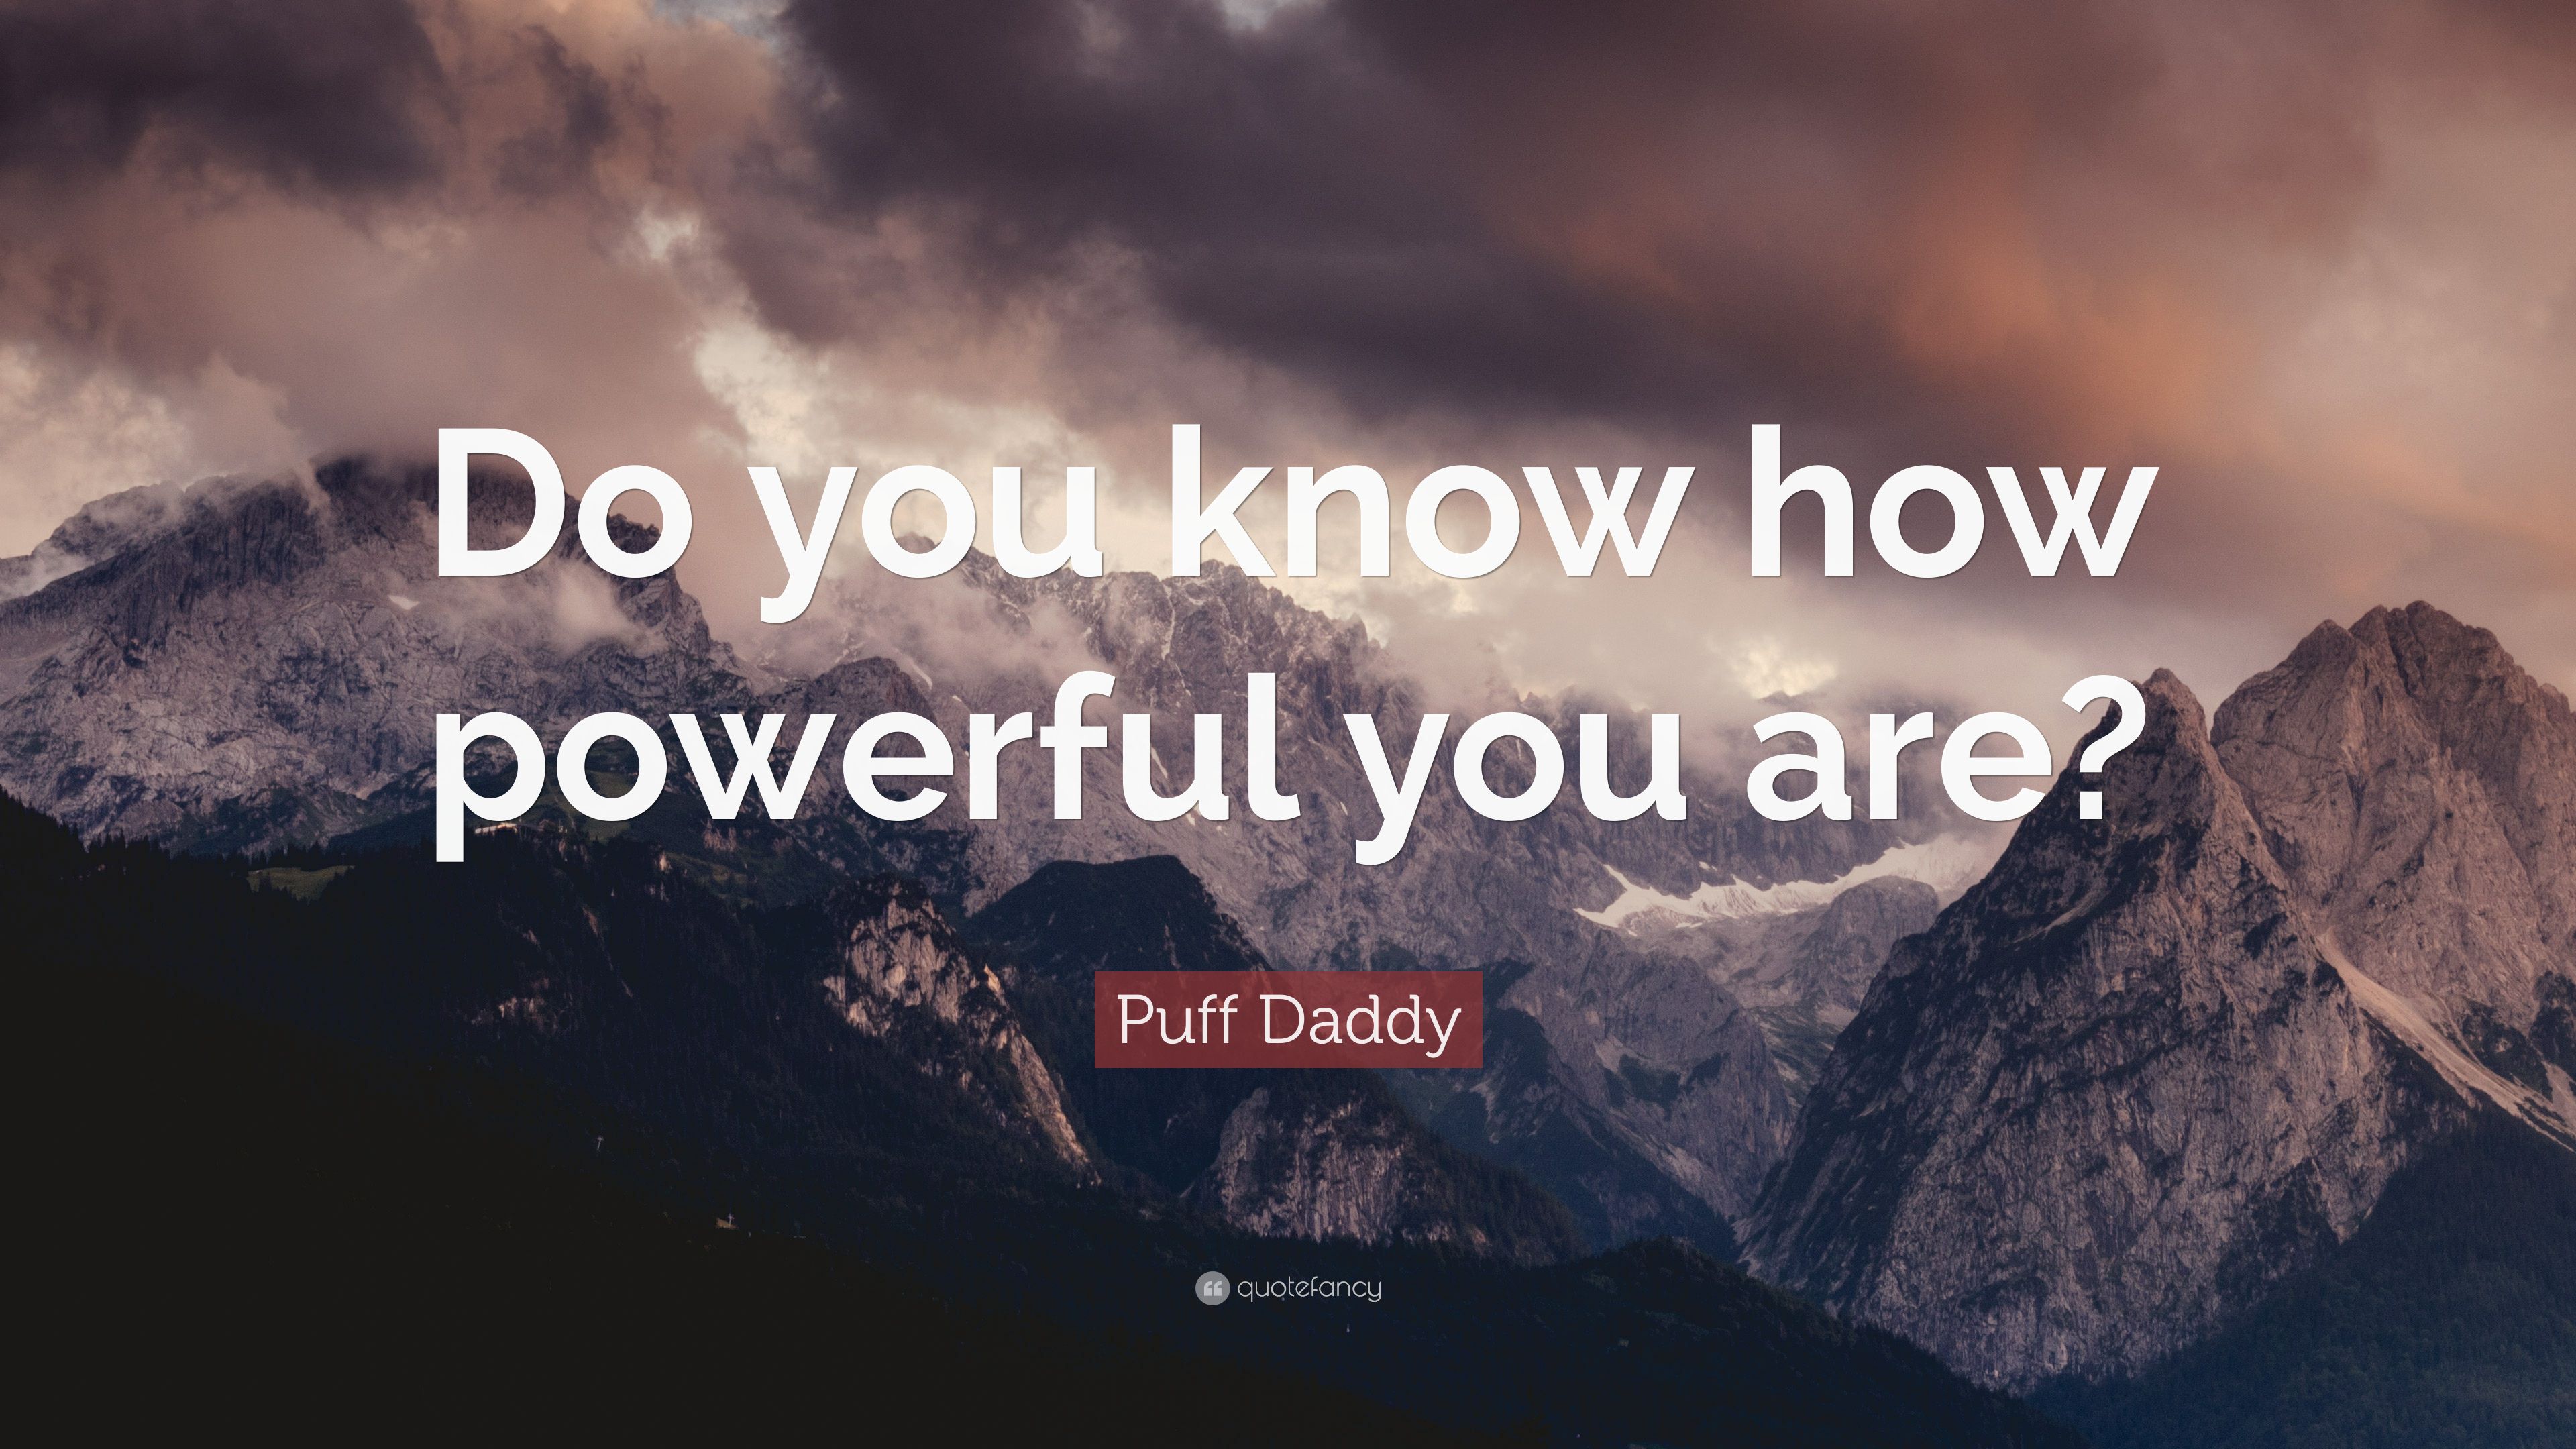 Puff Daddy Quote: "Do you know how powerful you are? 